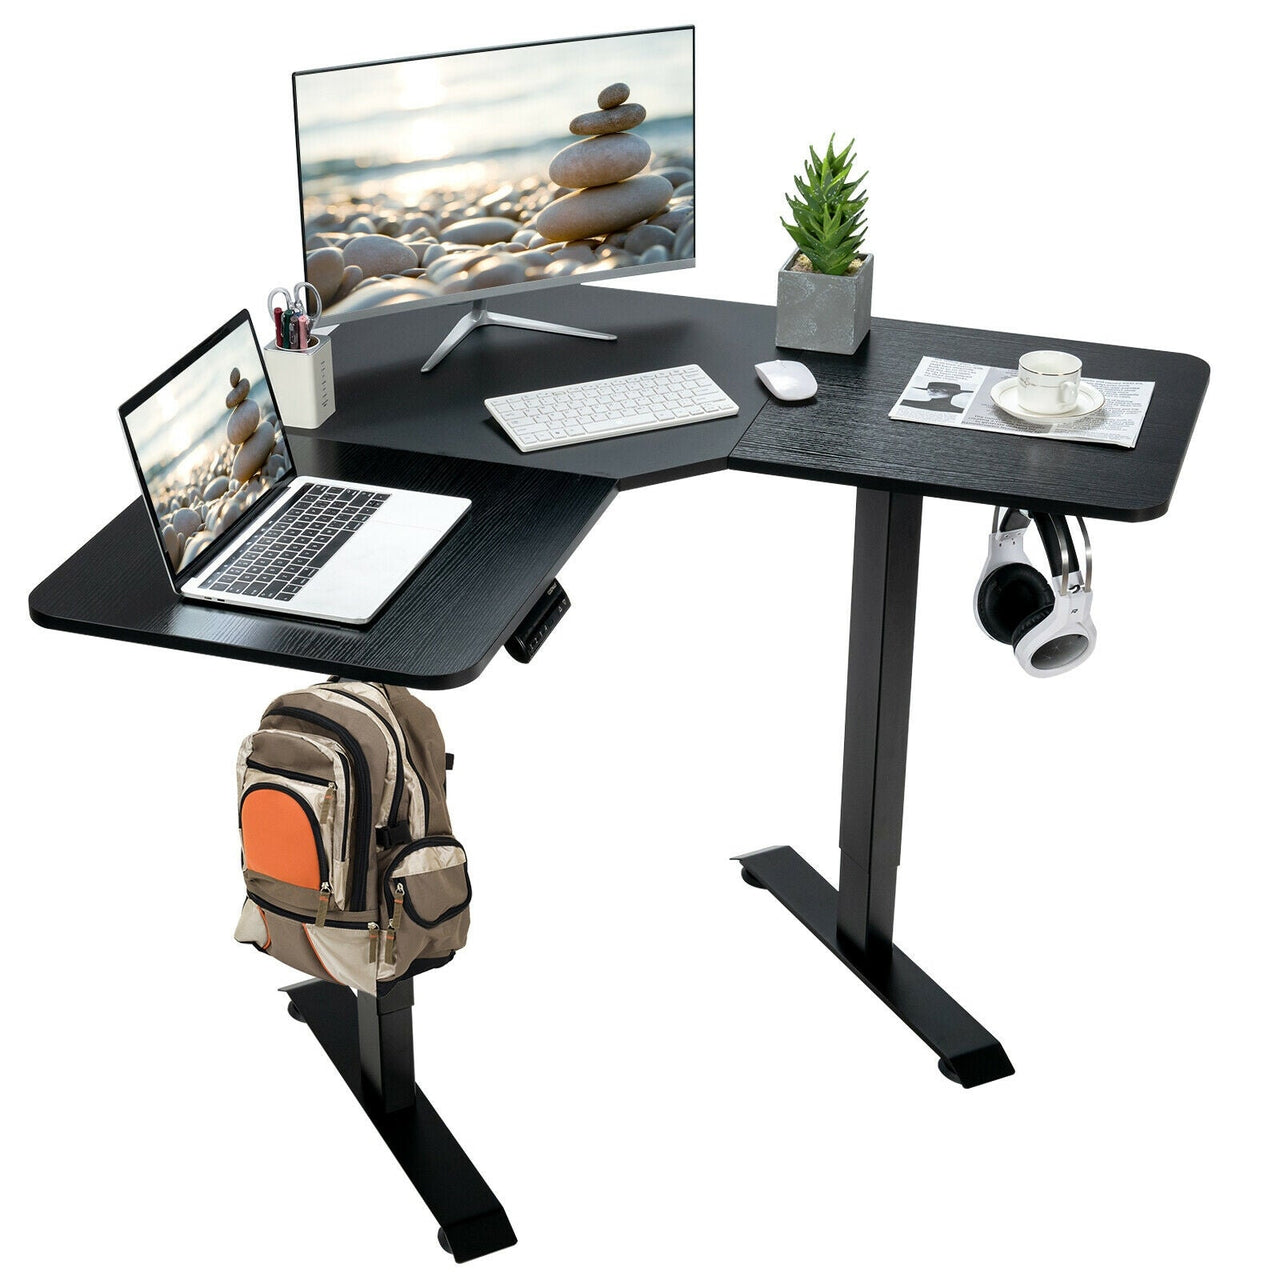 L-shaped Electric Standing Desk with 4 Memory Positions and LCD Display